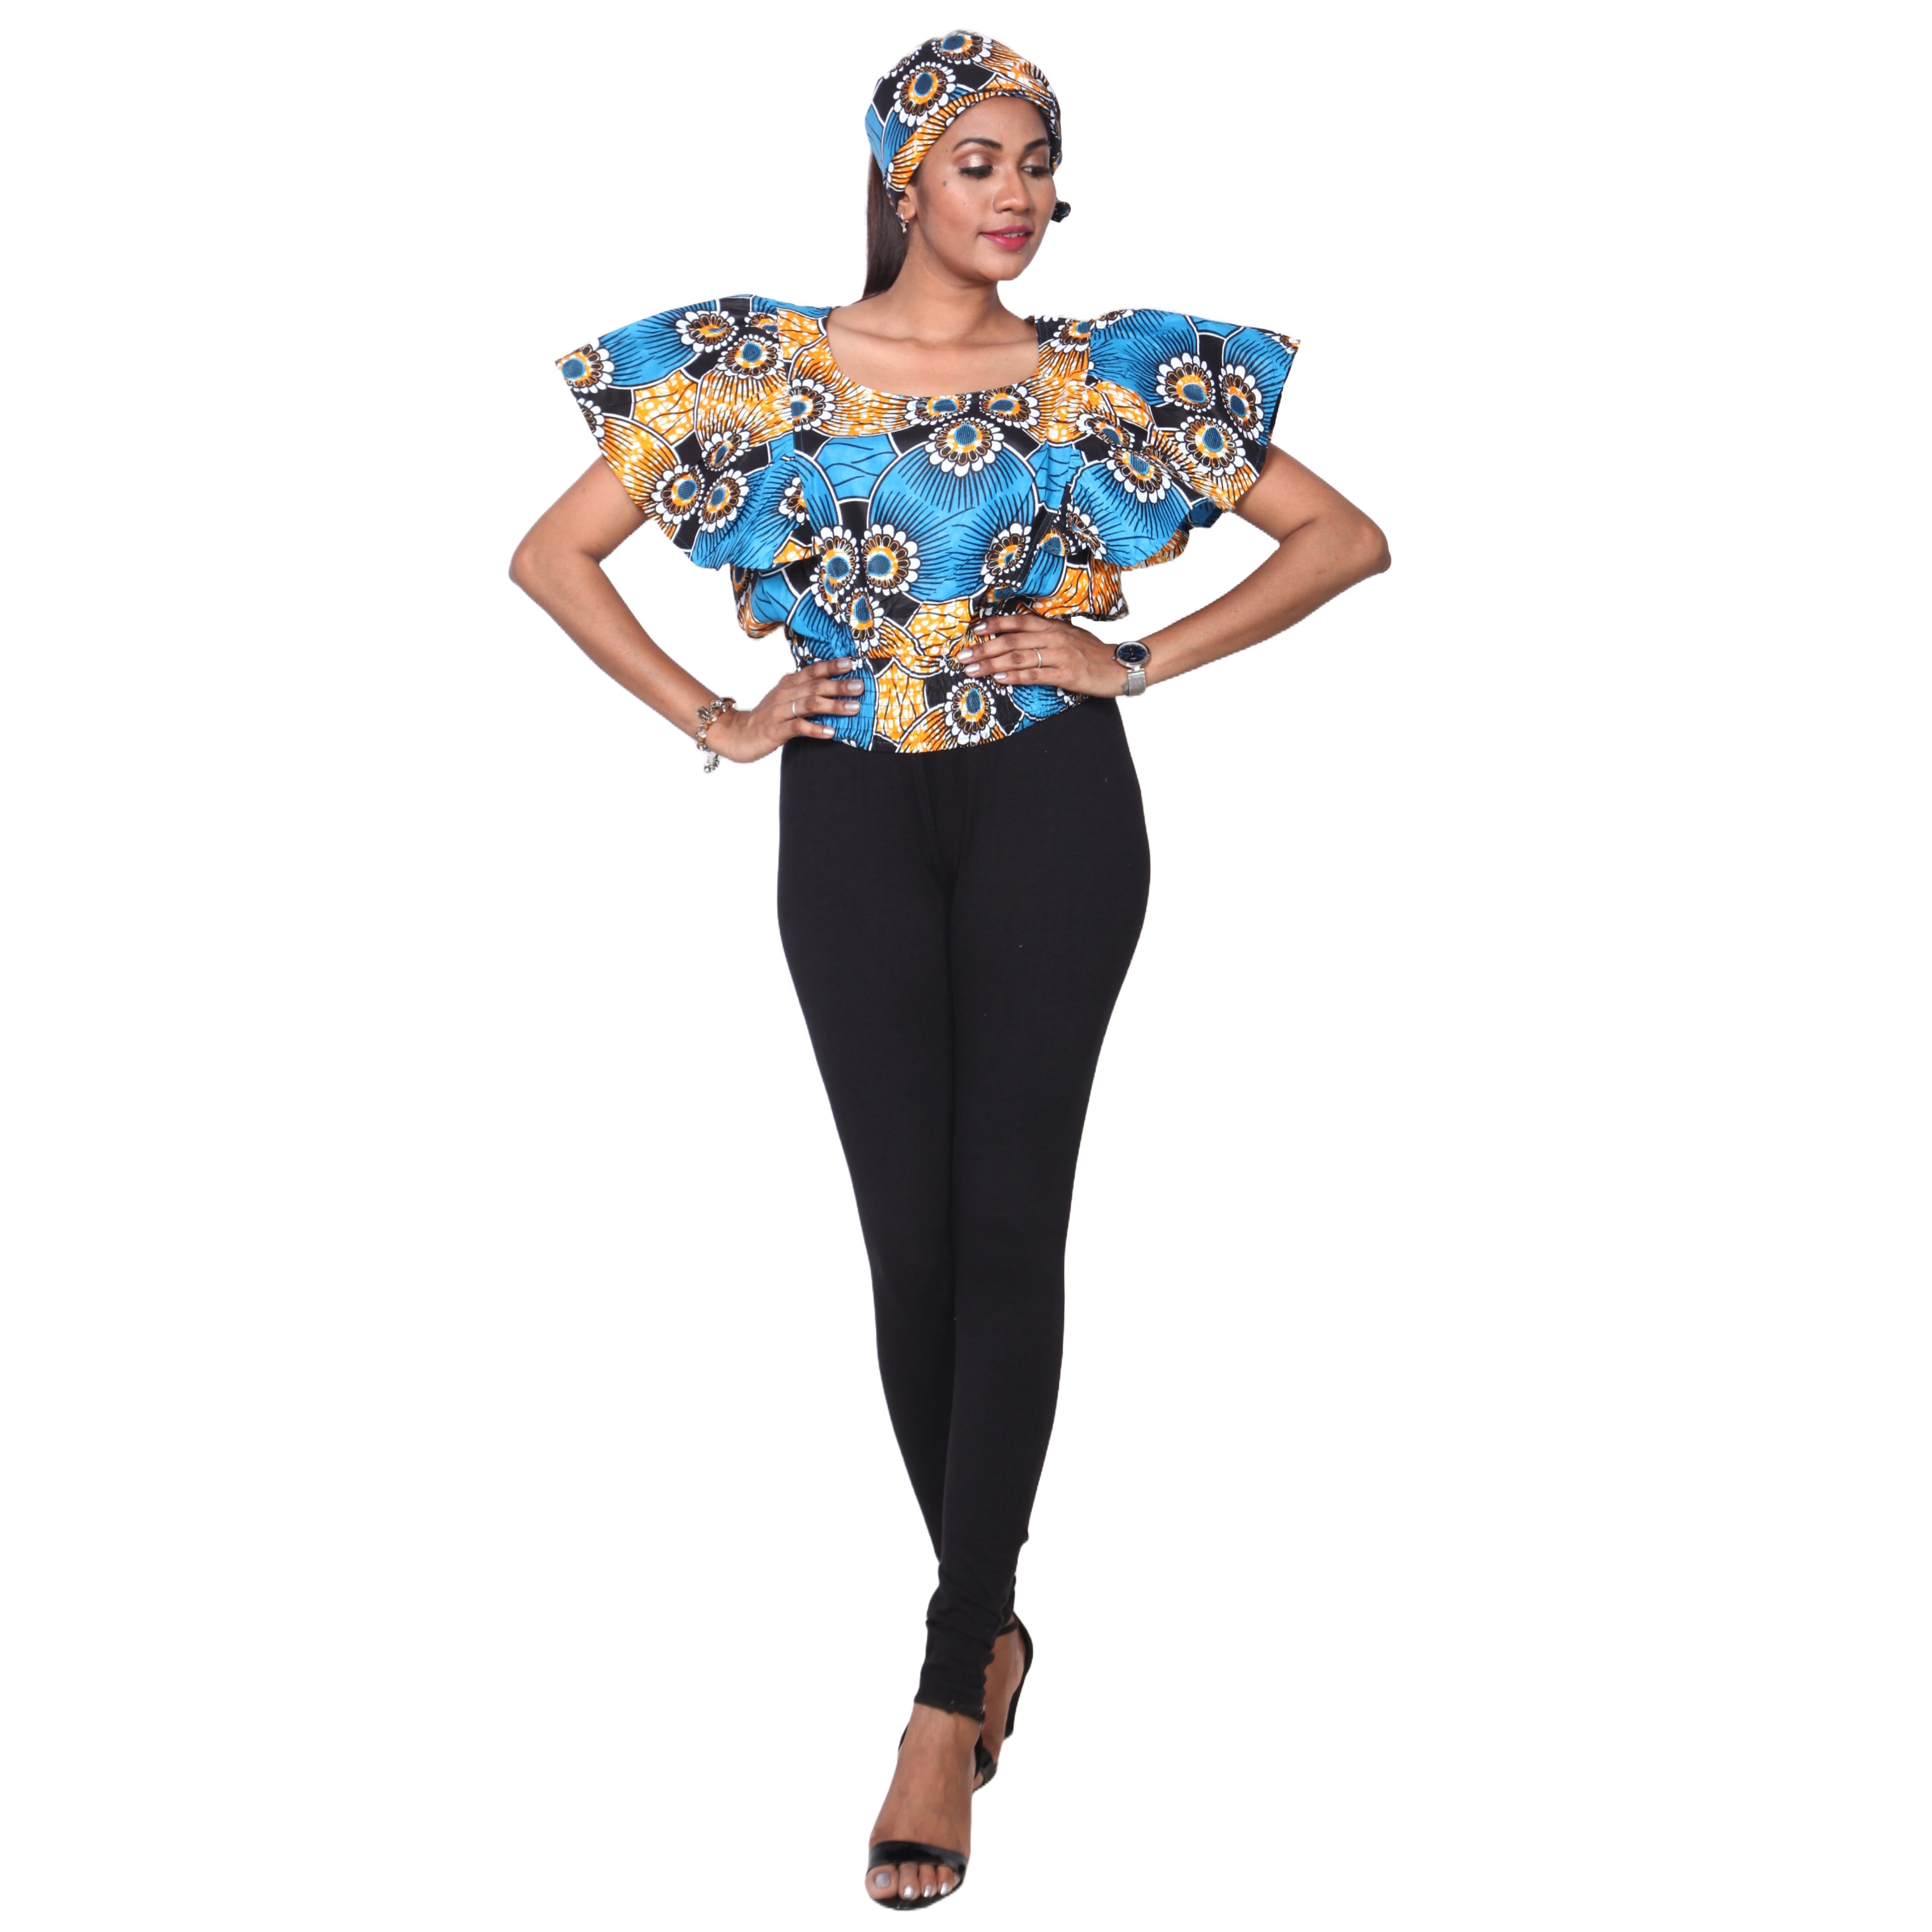 Women's African Print Short Sleeve Top blue and yellow